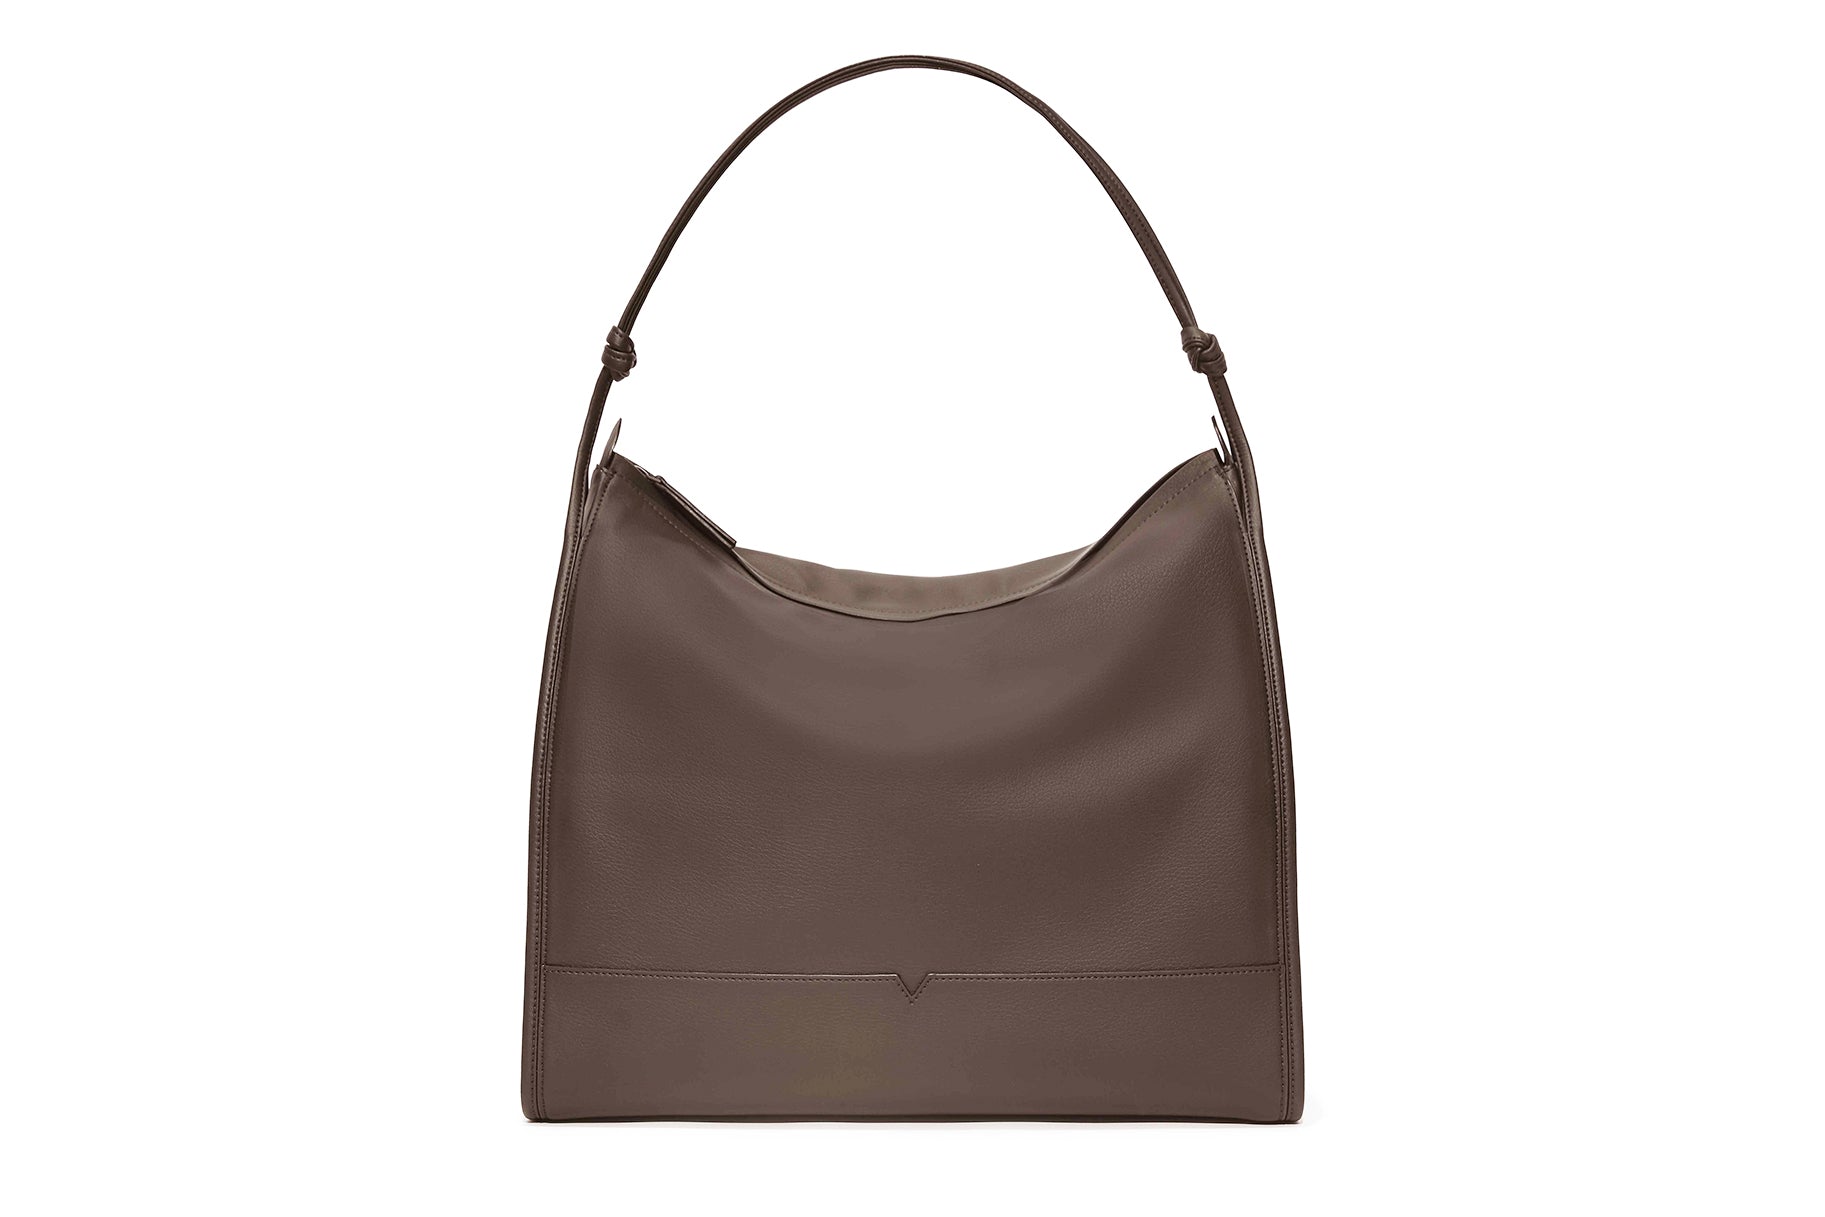 The Shoulder Bag in Banbū Leather in Taupe image 1